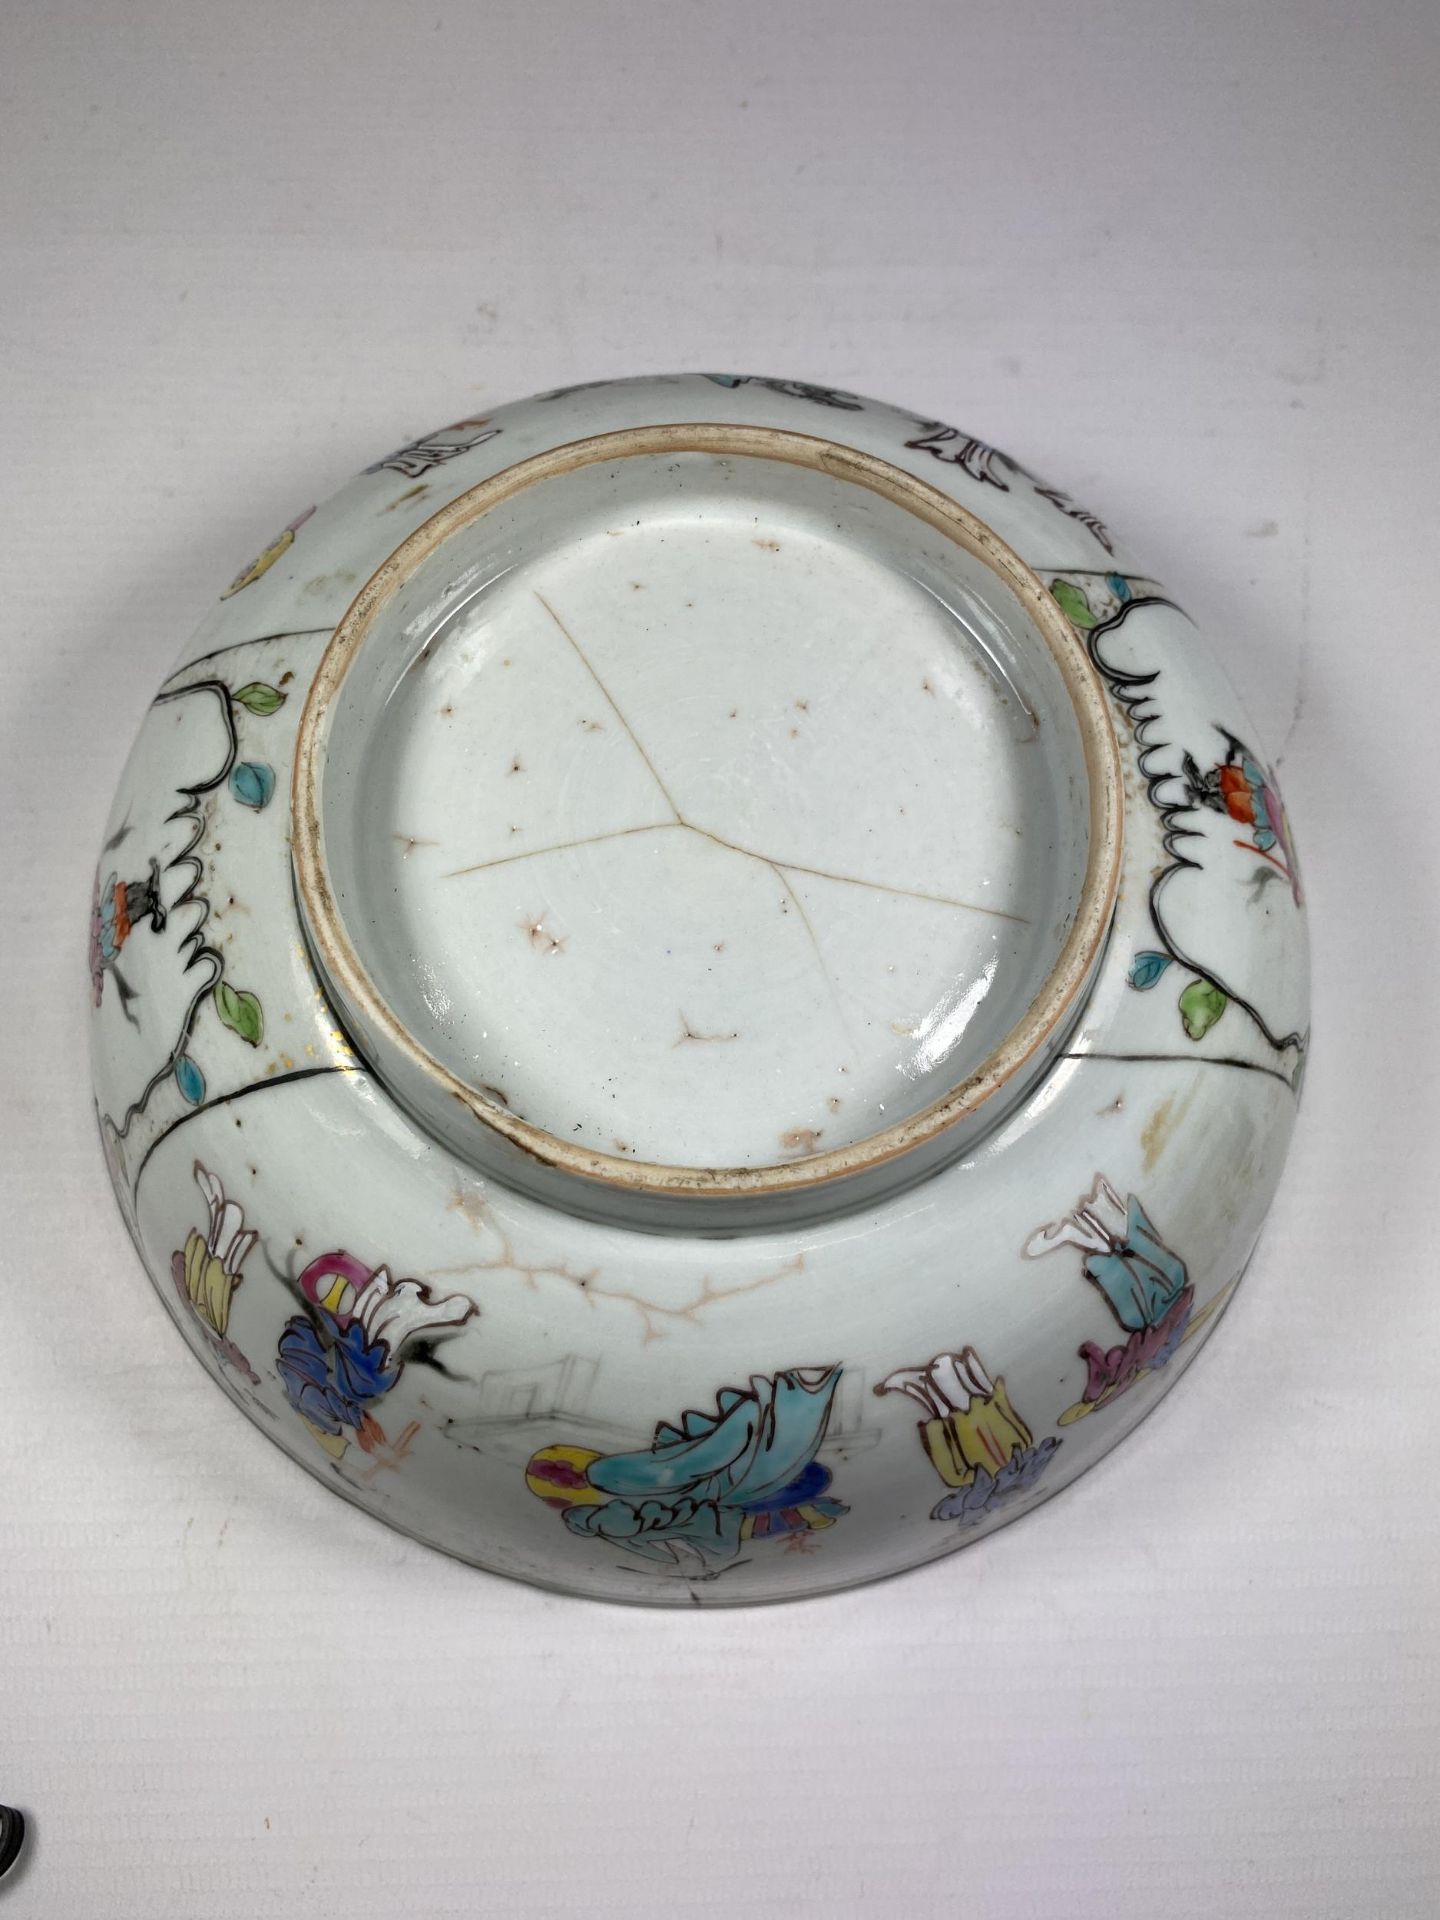 A LATE 18TH / EARLY 19TH CENTURY CHINESE PORCELAIN BOWL WITH ENAMELLED FIGURE DESIGN, DIAMETER 20CM - Image 5 of 8